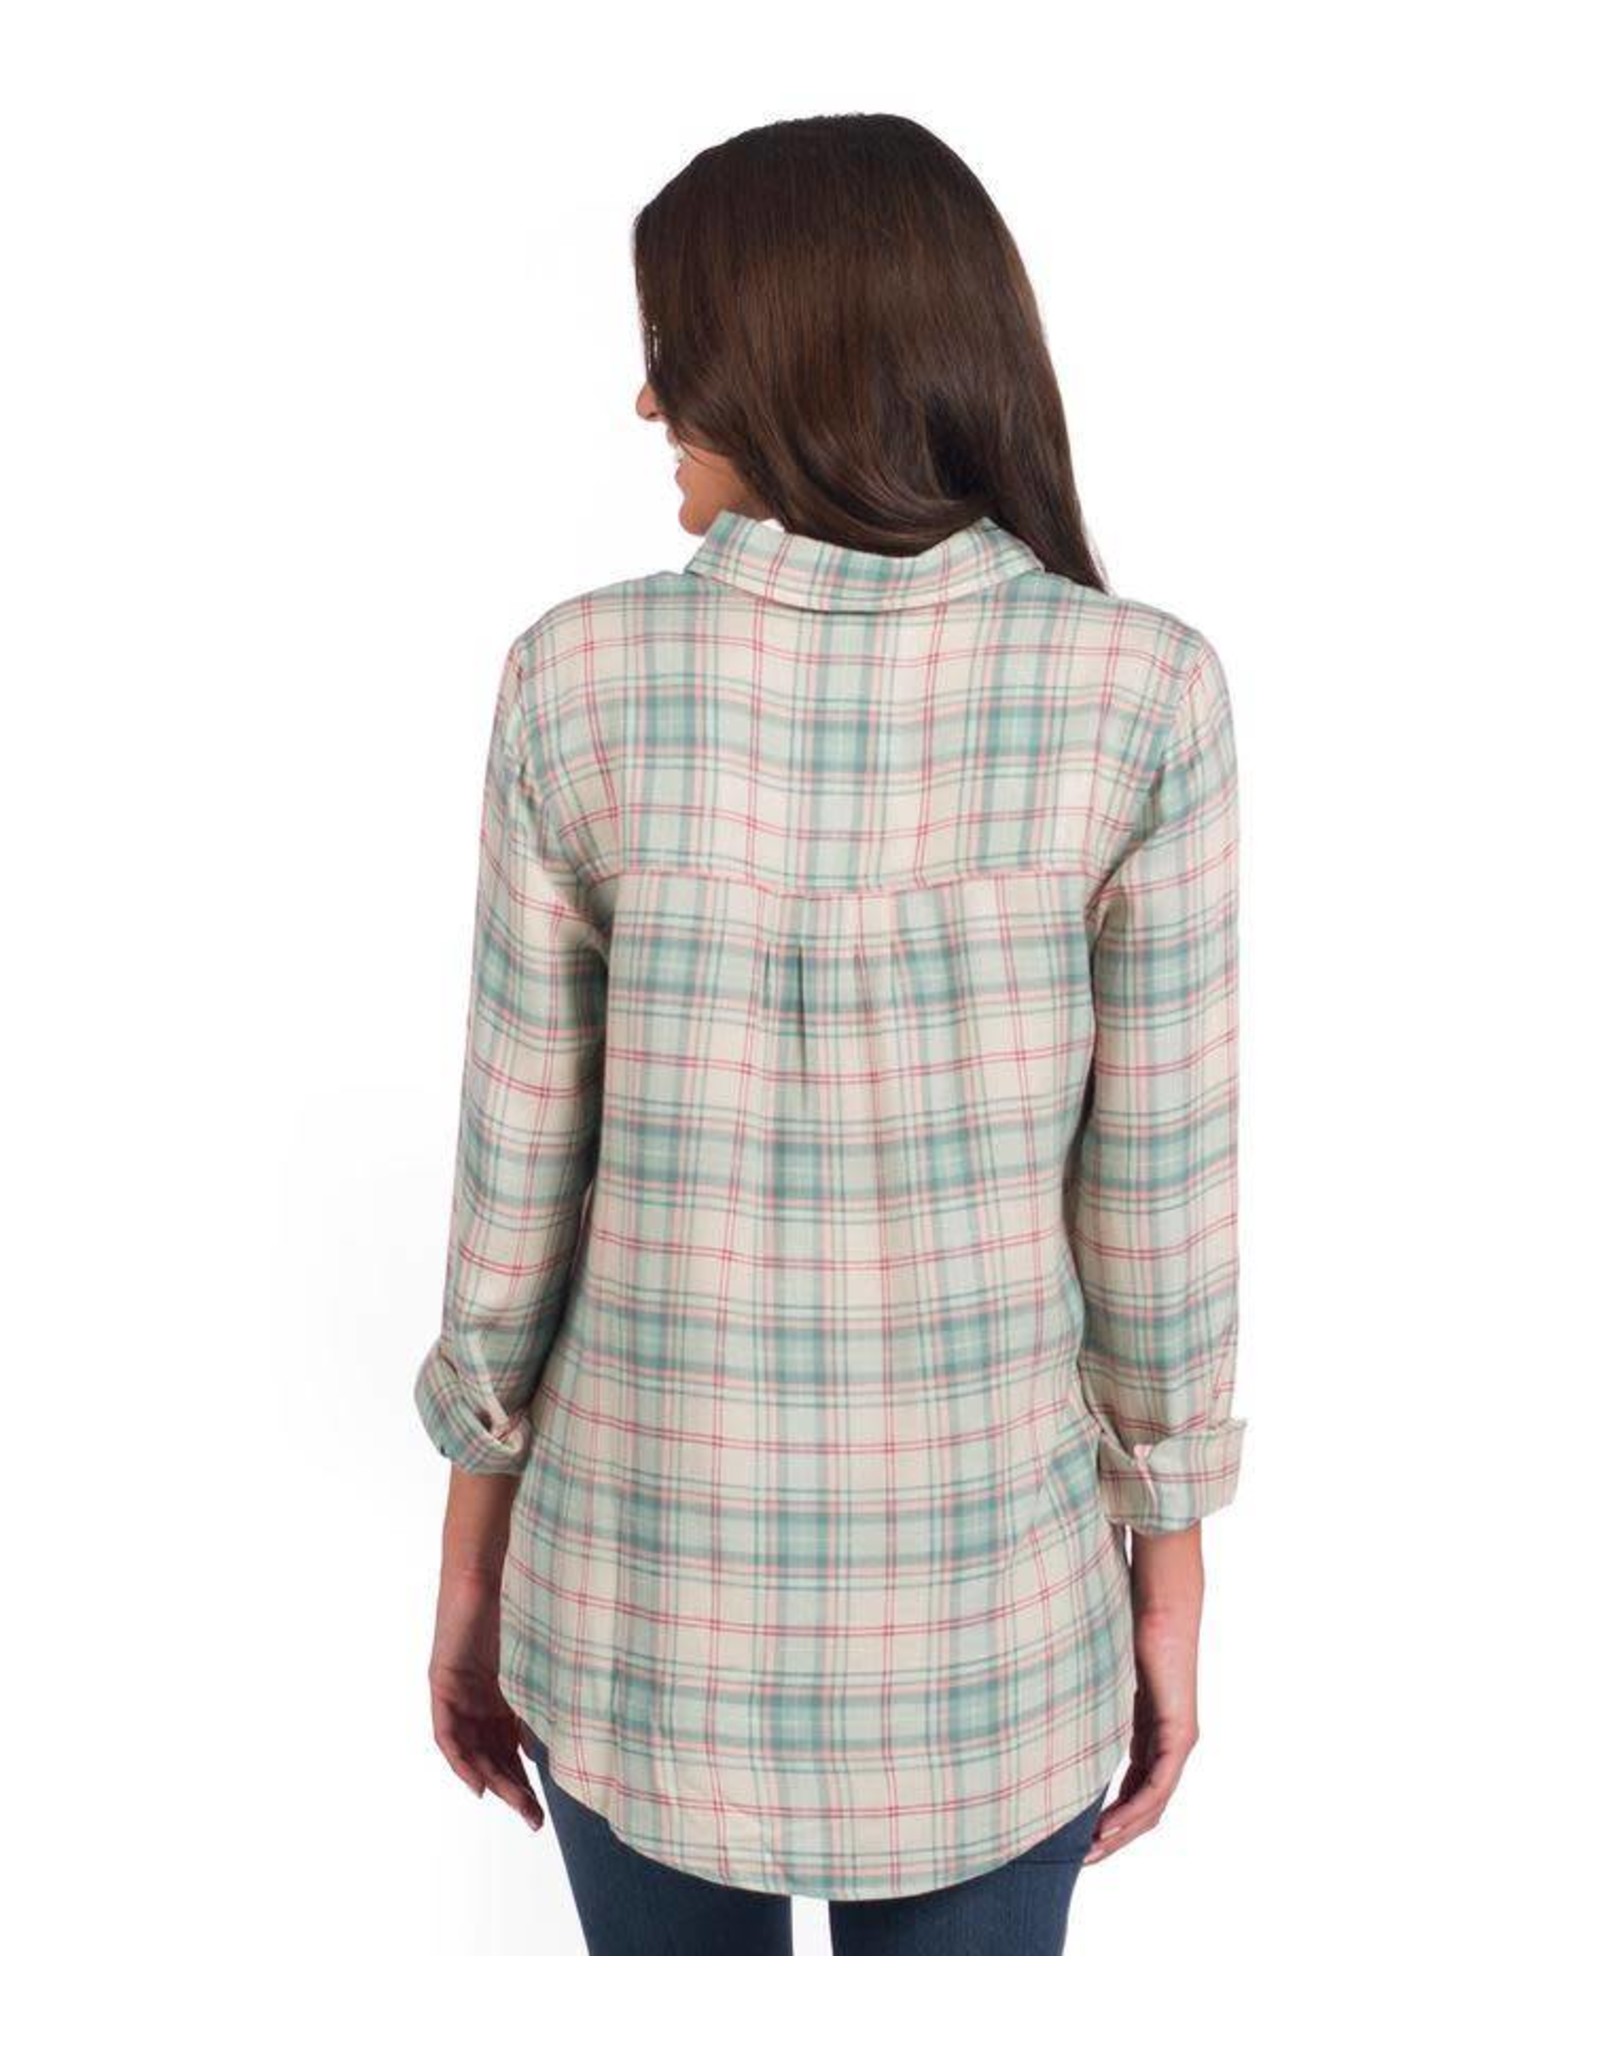 Southern Shirt Co. Southern Shirt Co. Taylor Tunic Pullover Birmingham